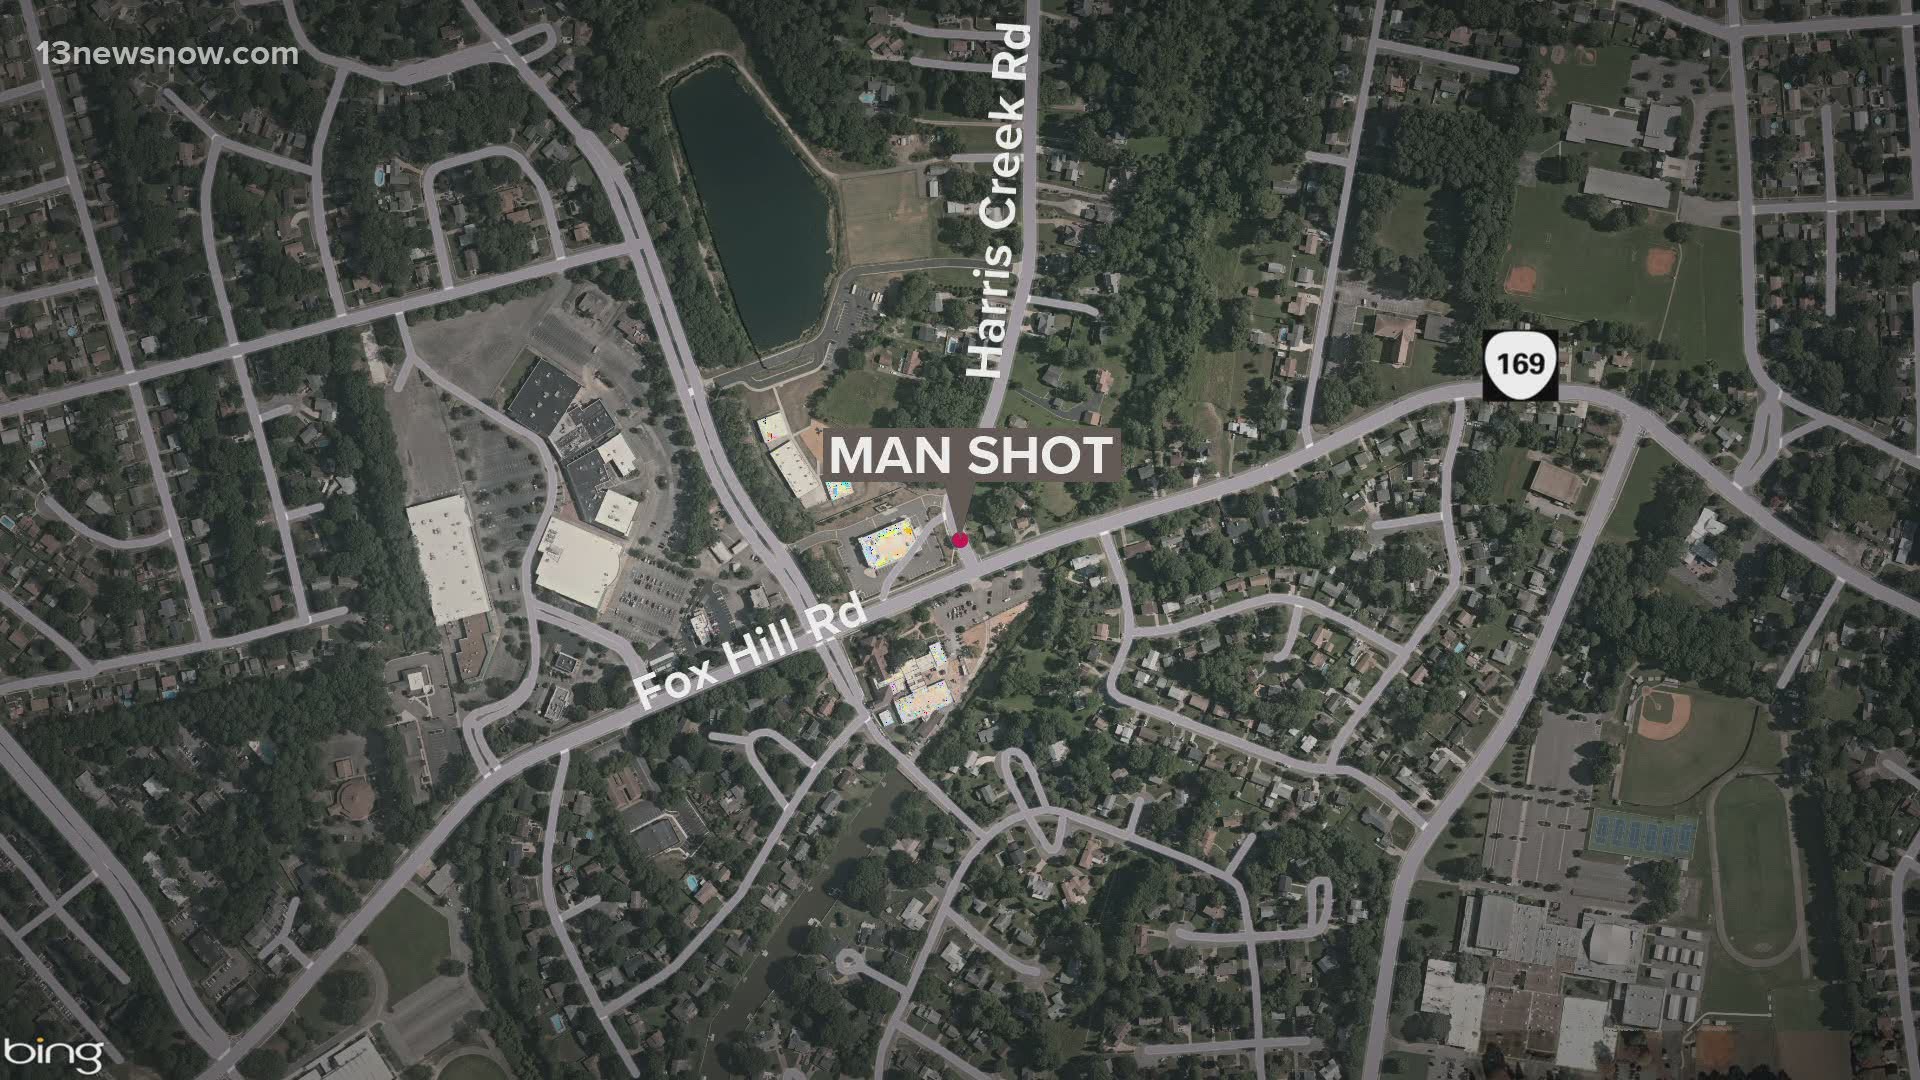 Hampton police are looking for the suspects who shot a 25-year-old man in the first block of Harris Creek Rd.